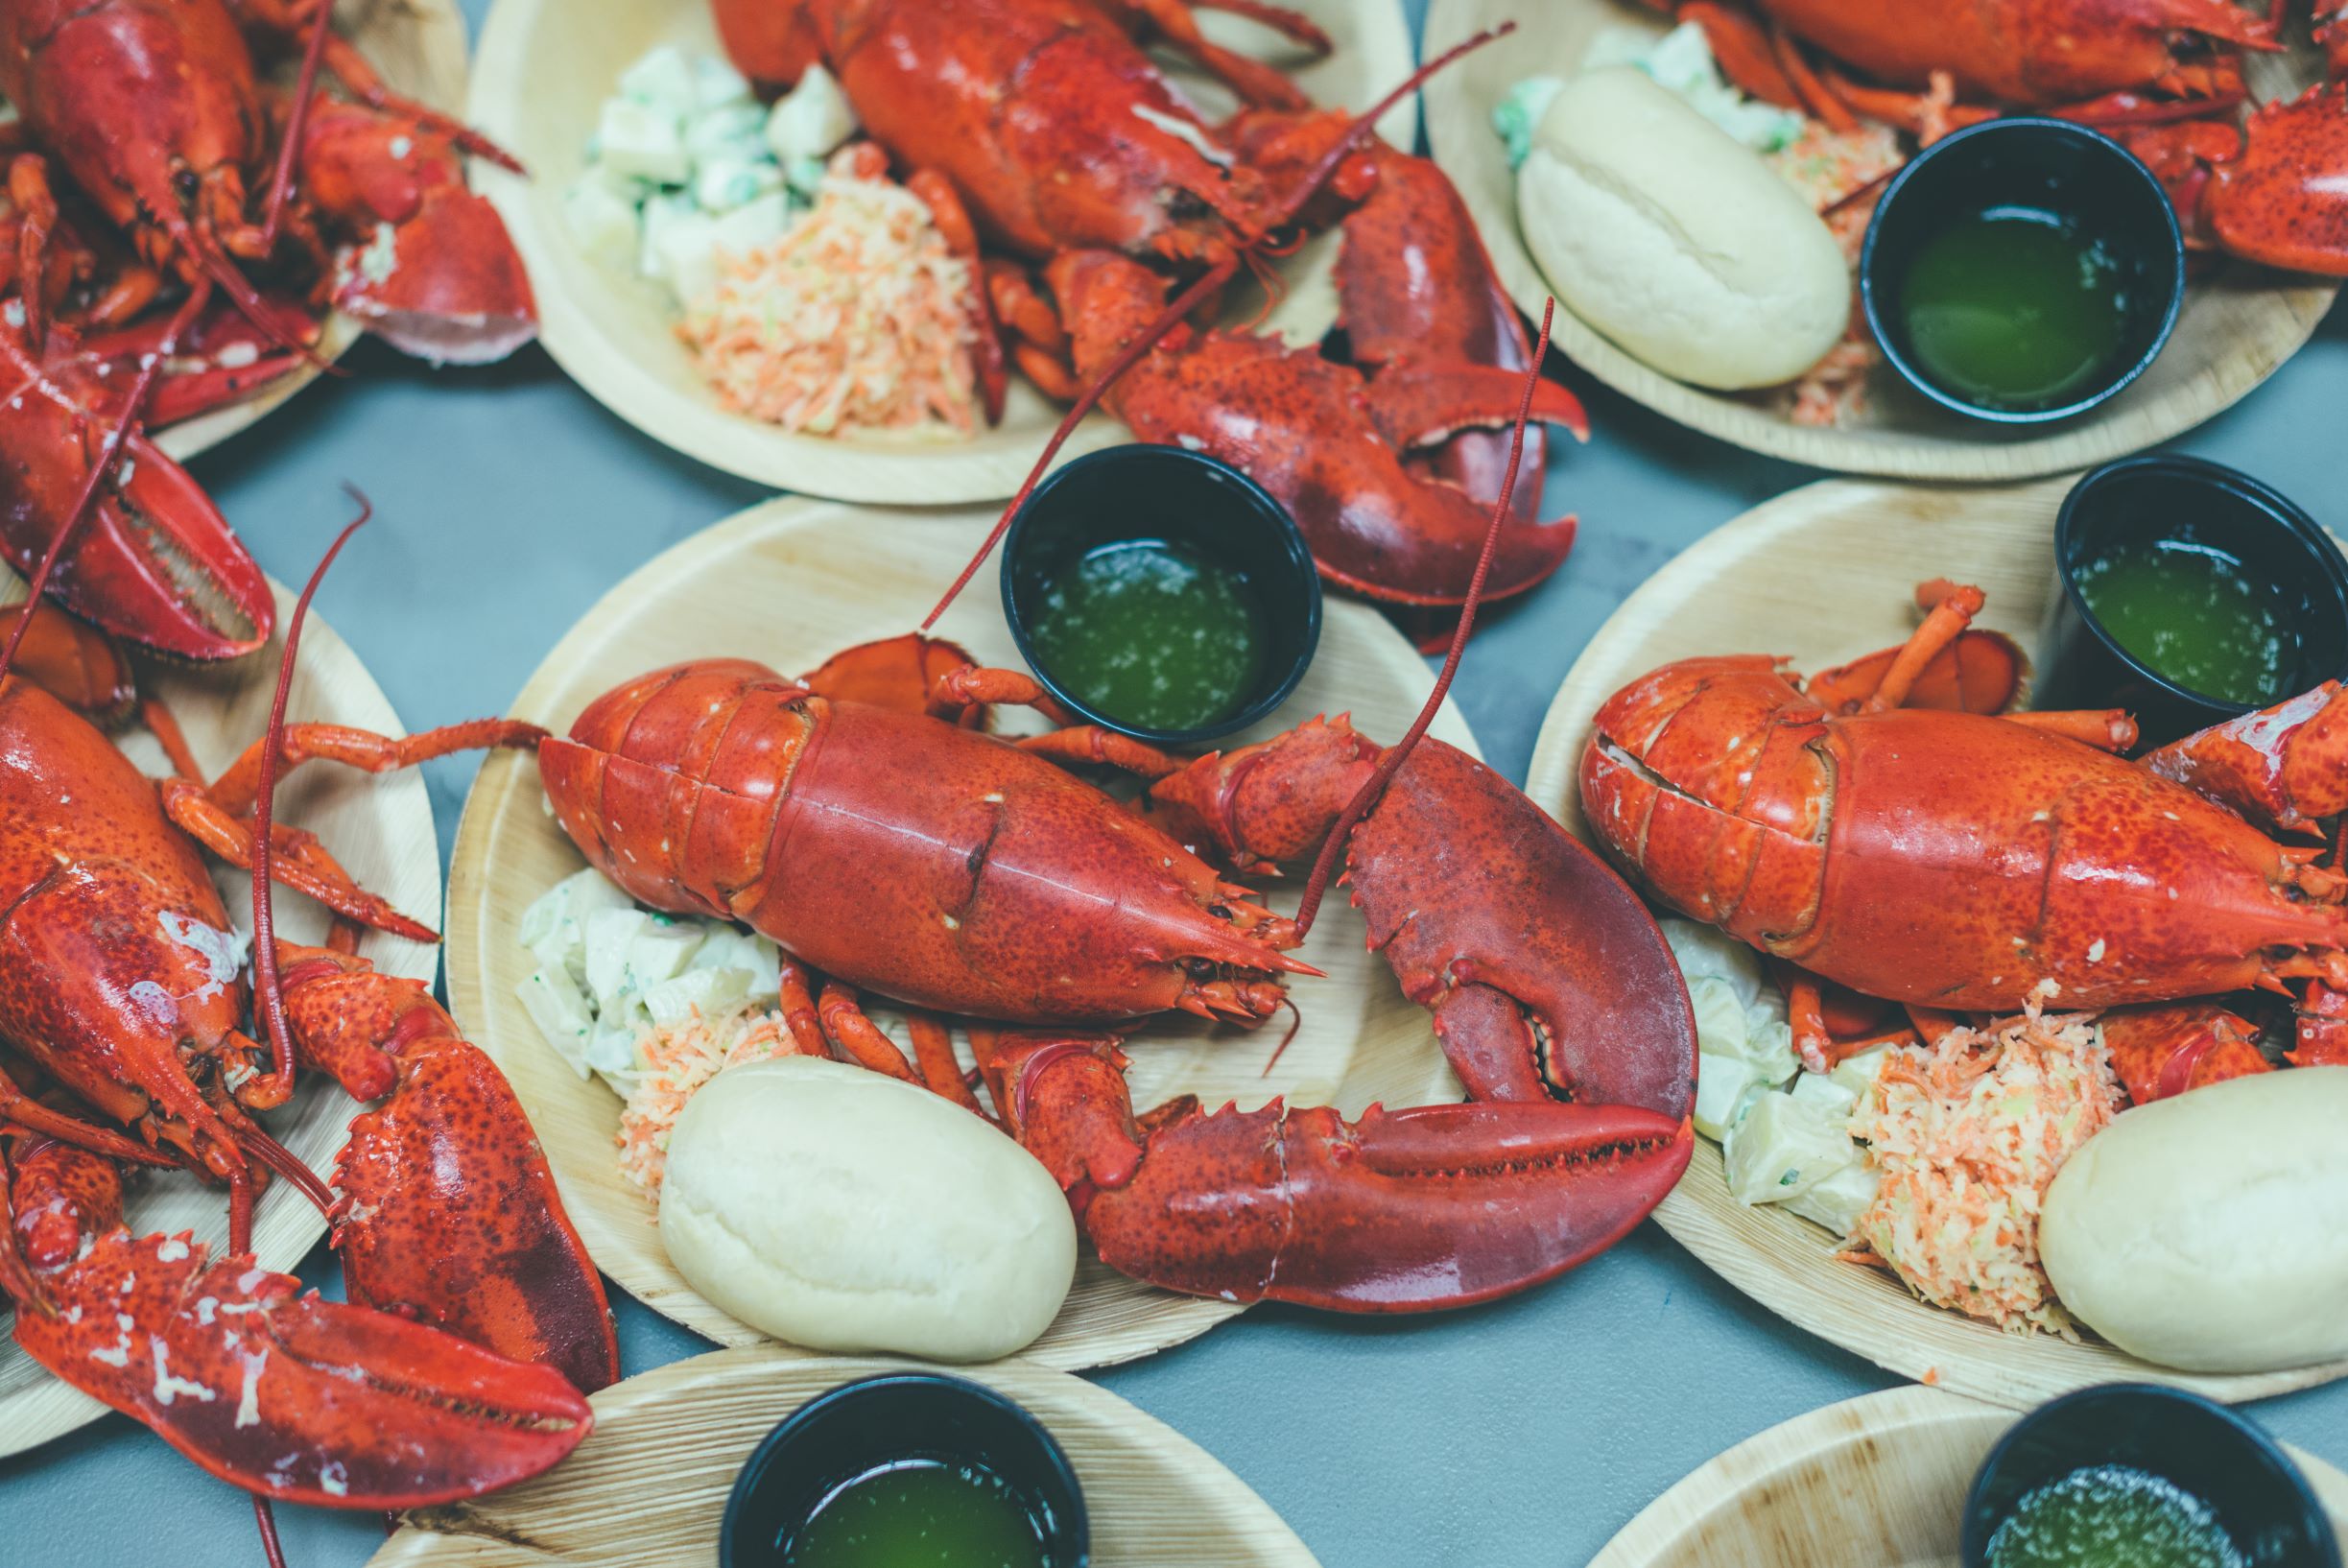 The Devour! Down-Home Lobster Supper & Take-Away presented by Exit Realty Town & Country and Clearwater Seafoods - IN PERSON